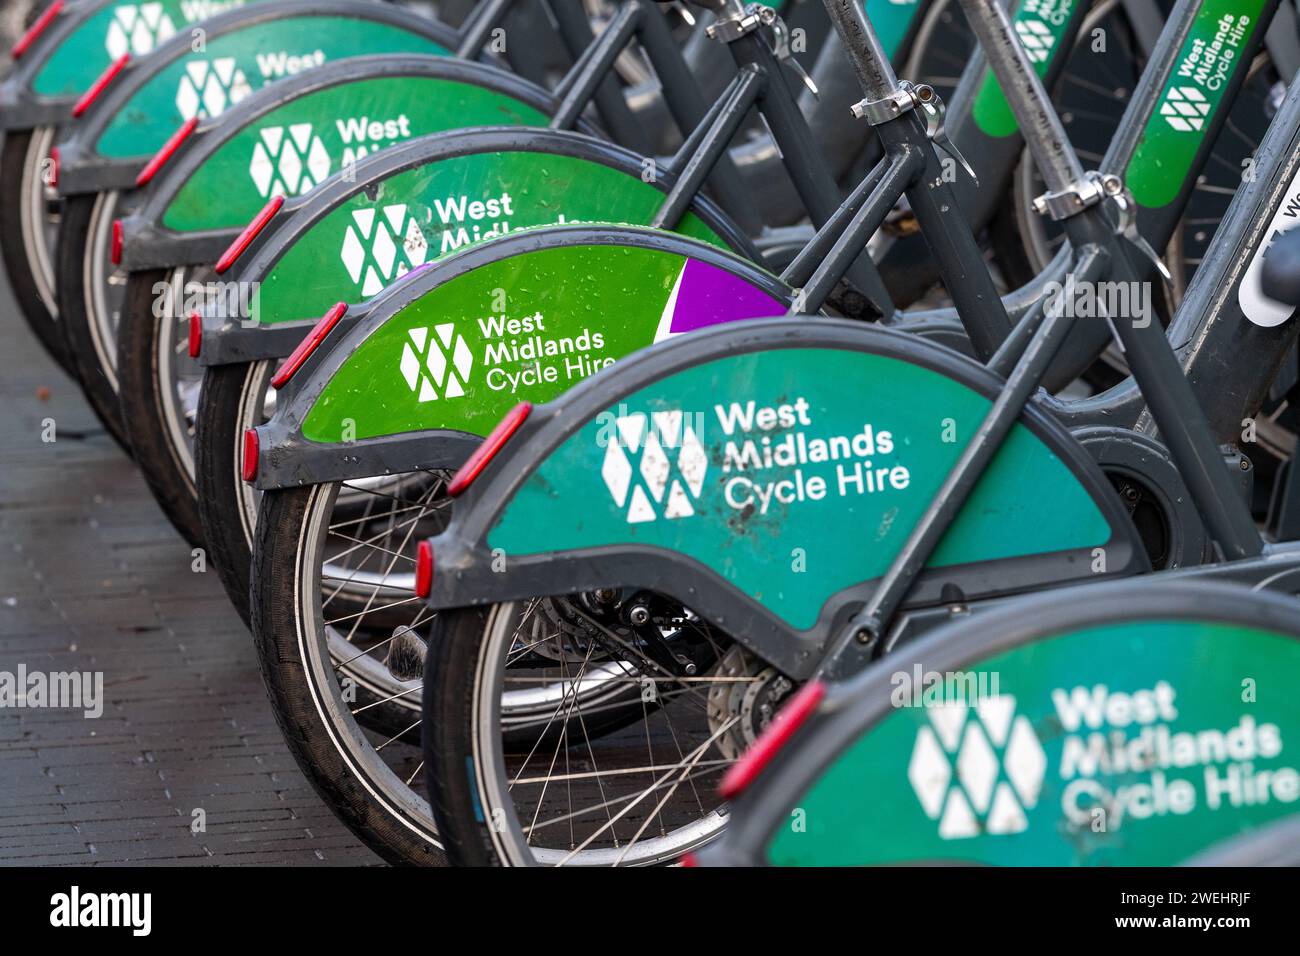 Linea di biciclette West Midlands Cycle Hire a Coventry, West Midlands, Regno Unito. Foto Stock